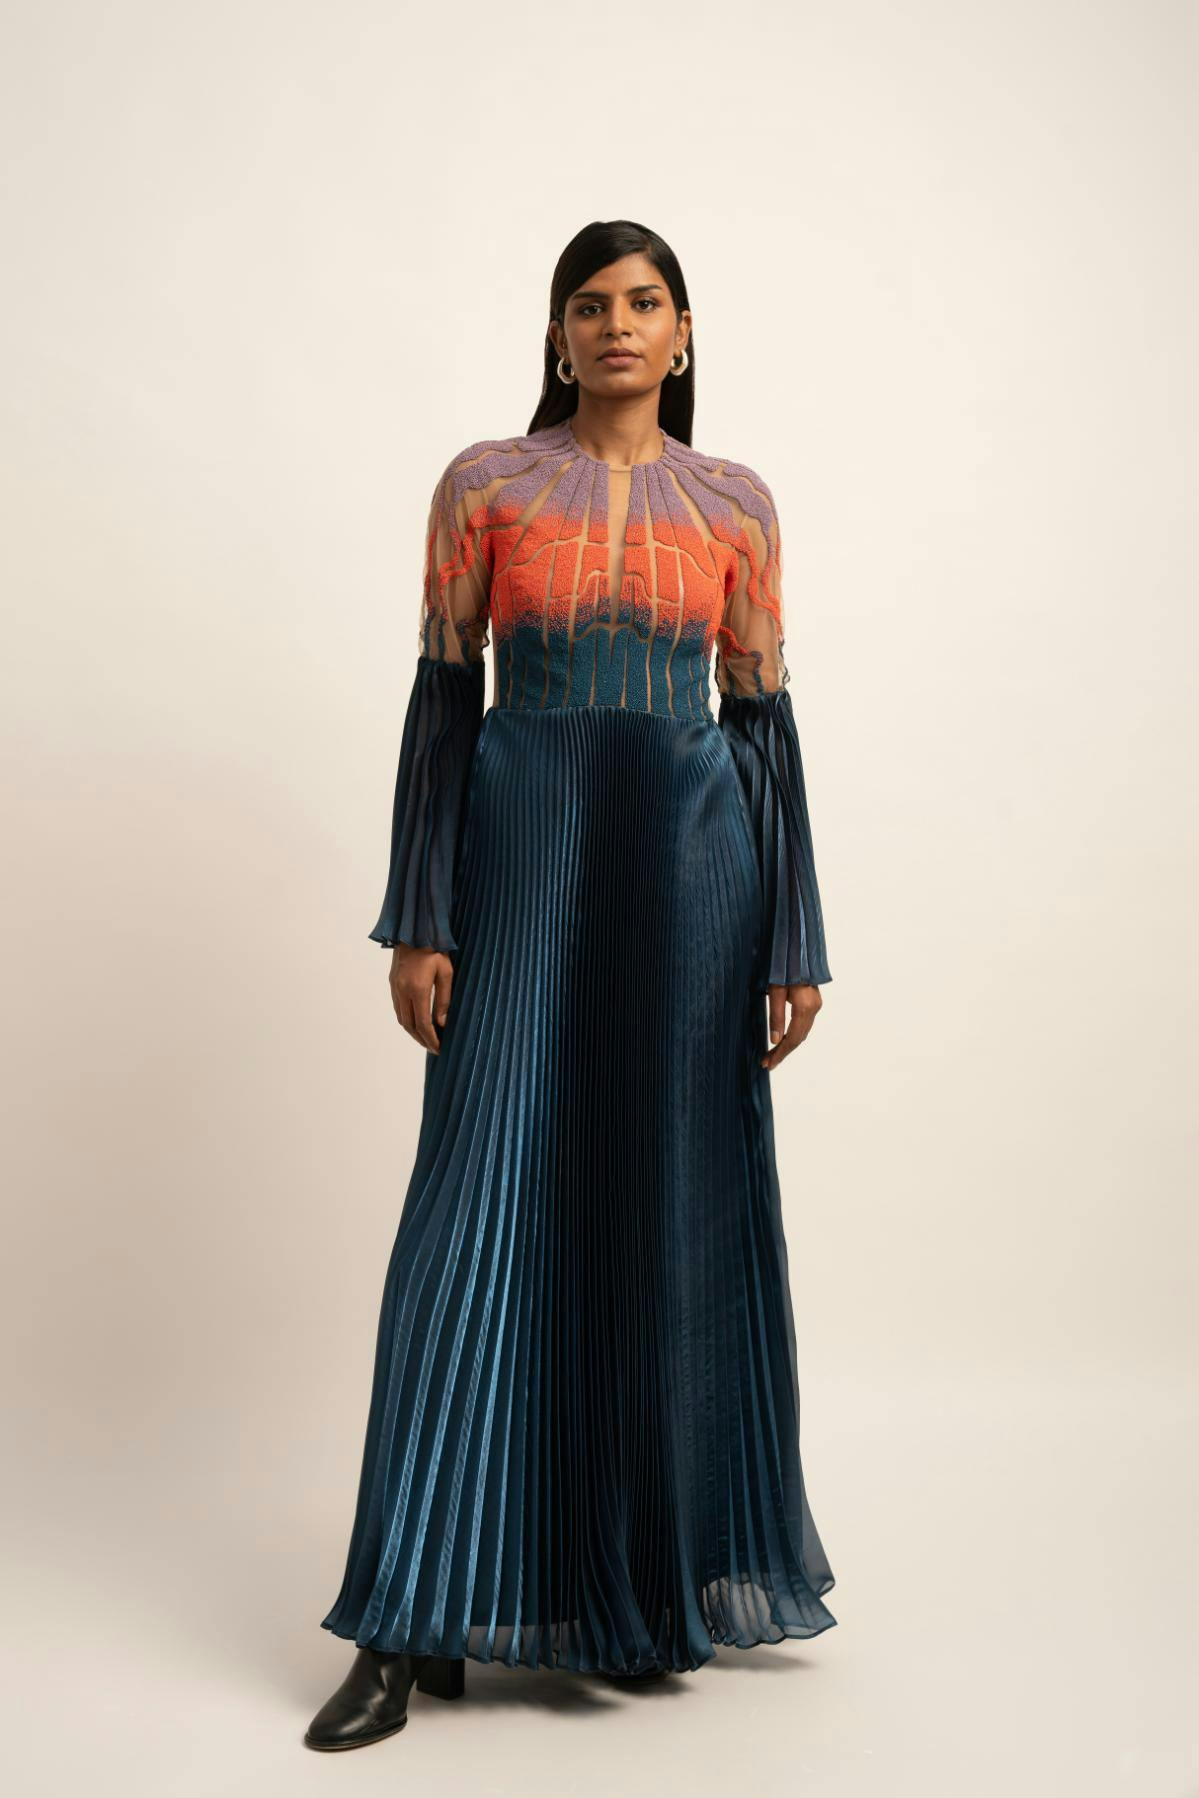 The Luminous Flutter Beaded Gown, a product by Siddhant Agrawal Label